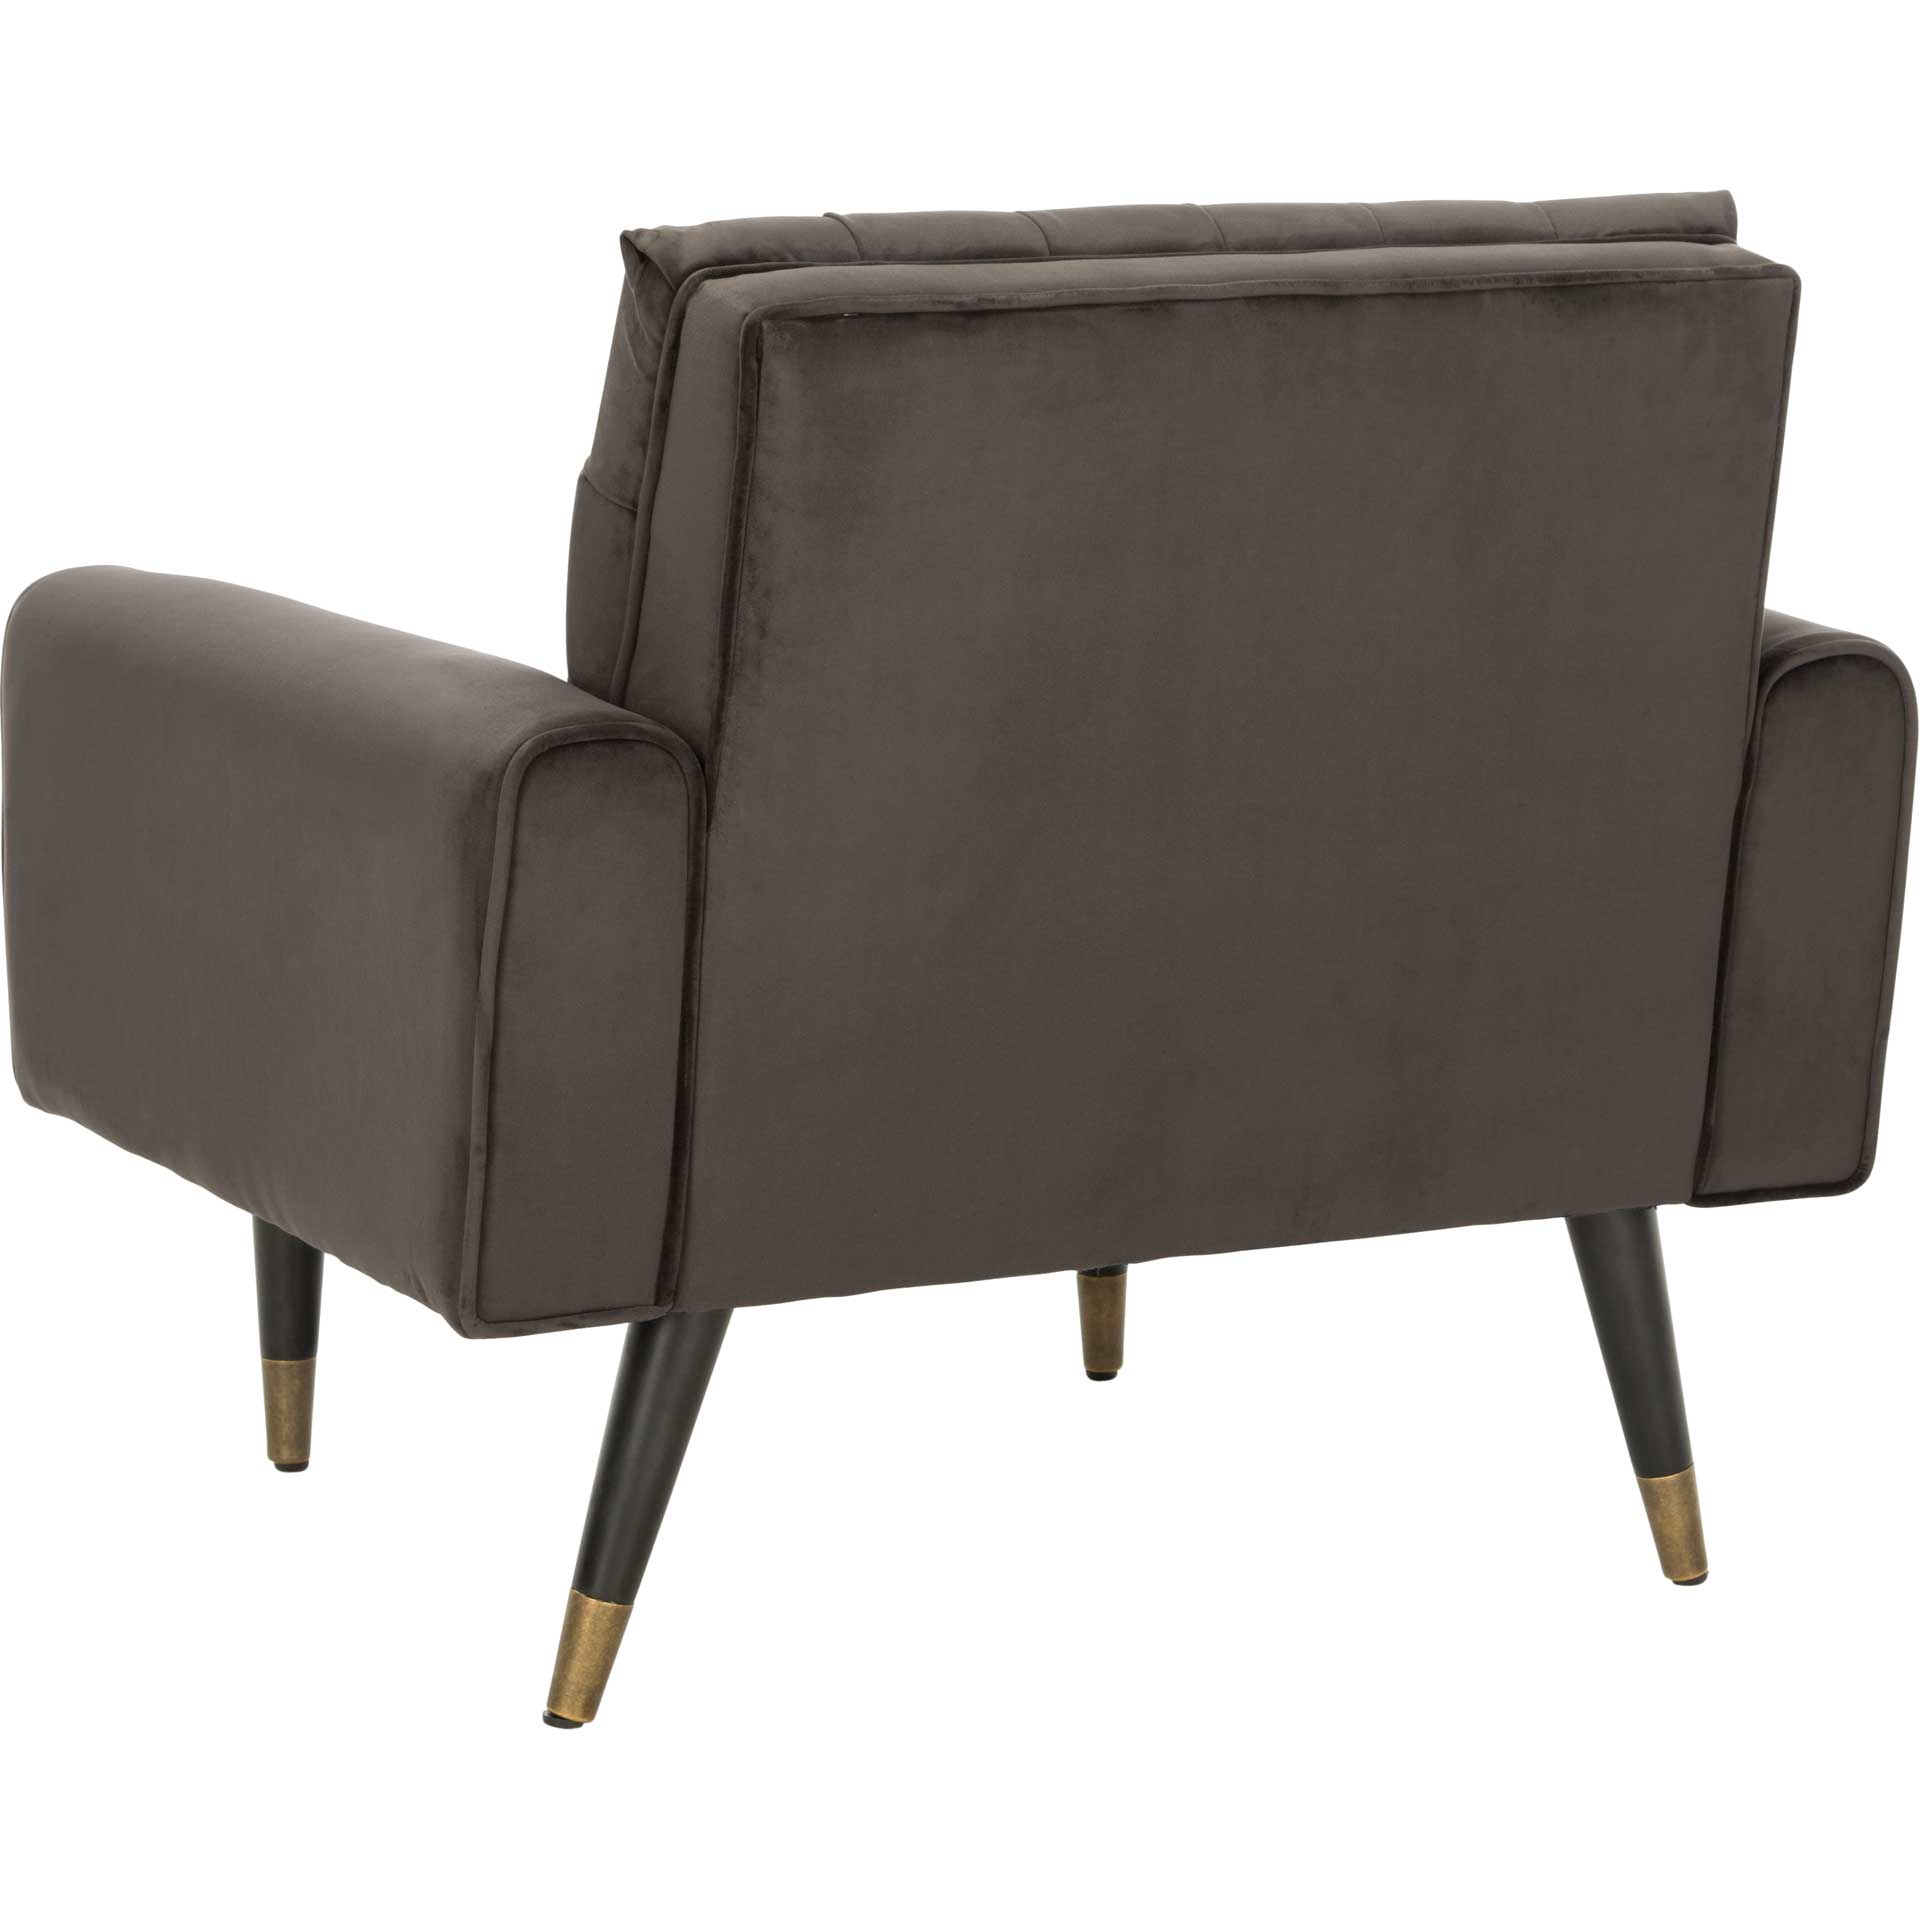 Amble Tufted Accent Chair Shale/Black/Brass